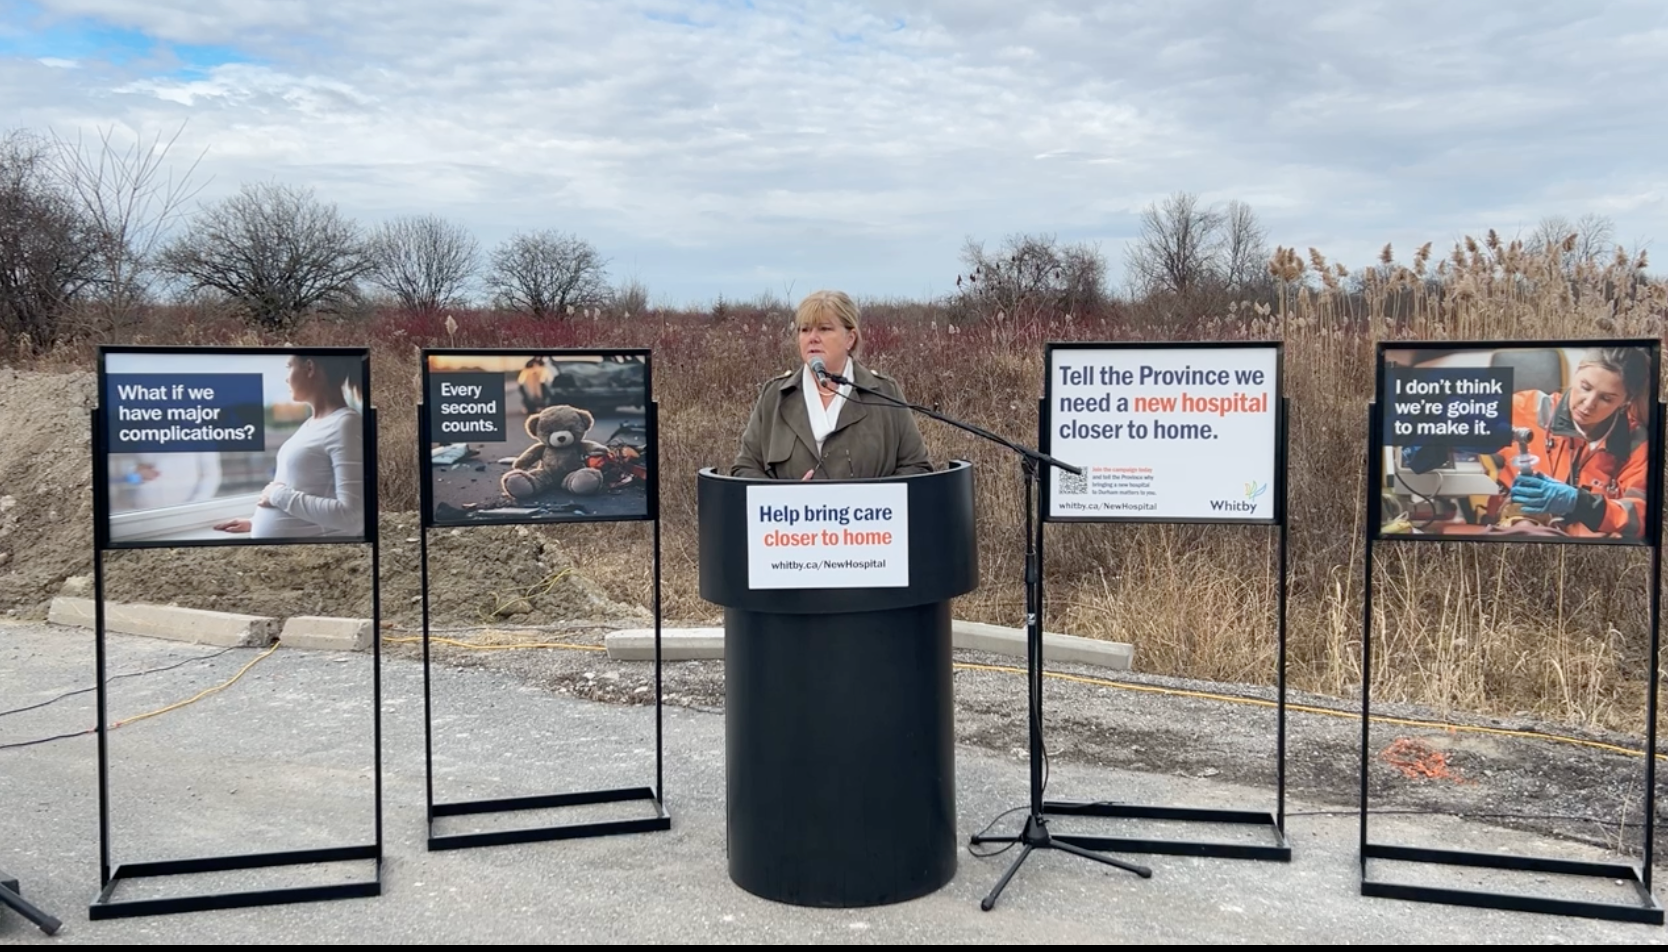 Whitby launches campaign advocating for new hospital in Durham Region